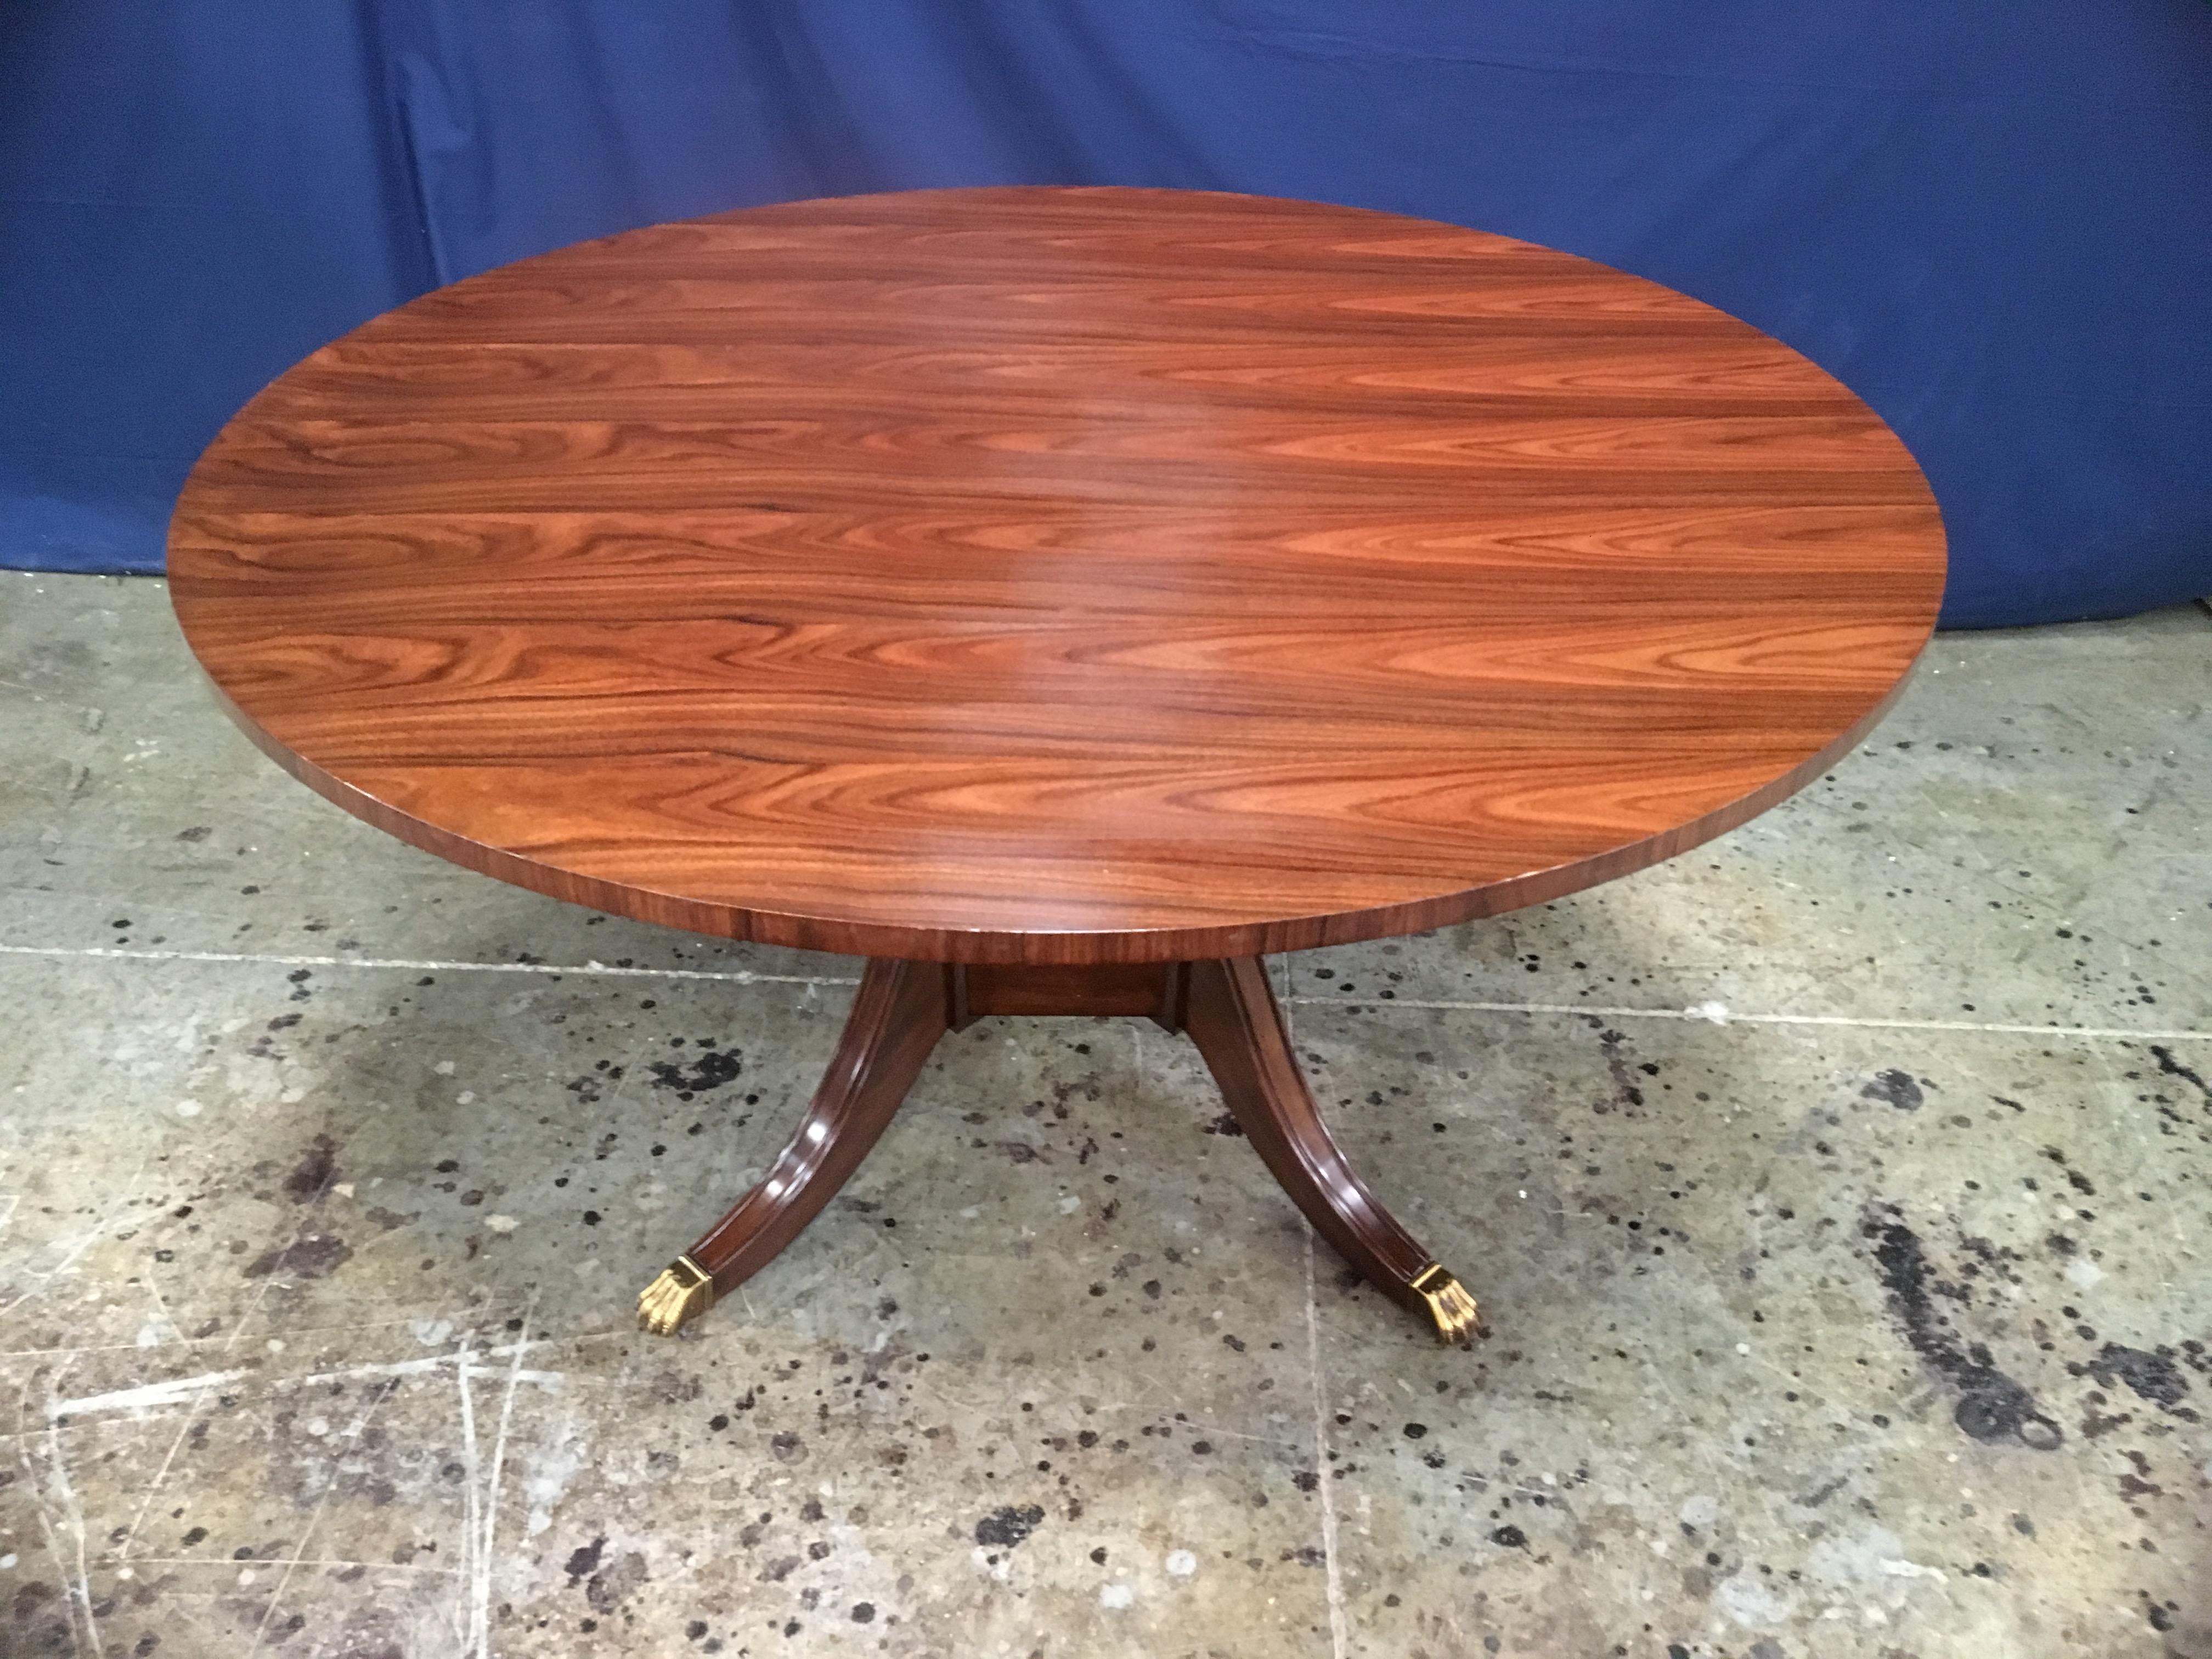 This is made-to-order round traditional Santos Rosewood top dining table made in the Leighton Hall shop. It features a field of slip-matched Santos Rosewood. The top has a hand rubbed and polished semigloss finish. The large birdcage pedestal has